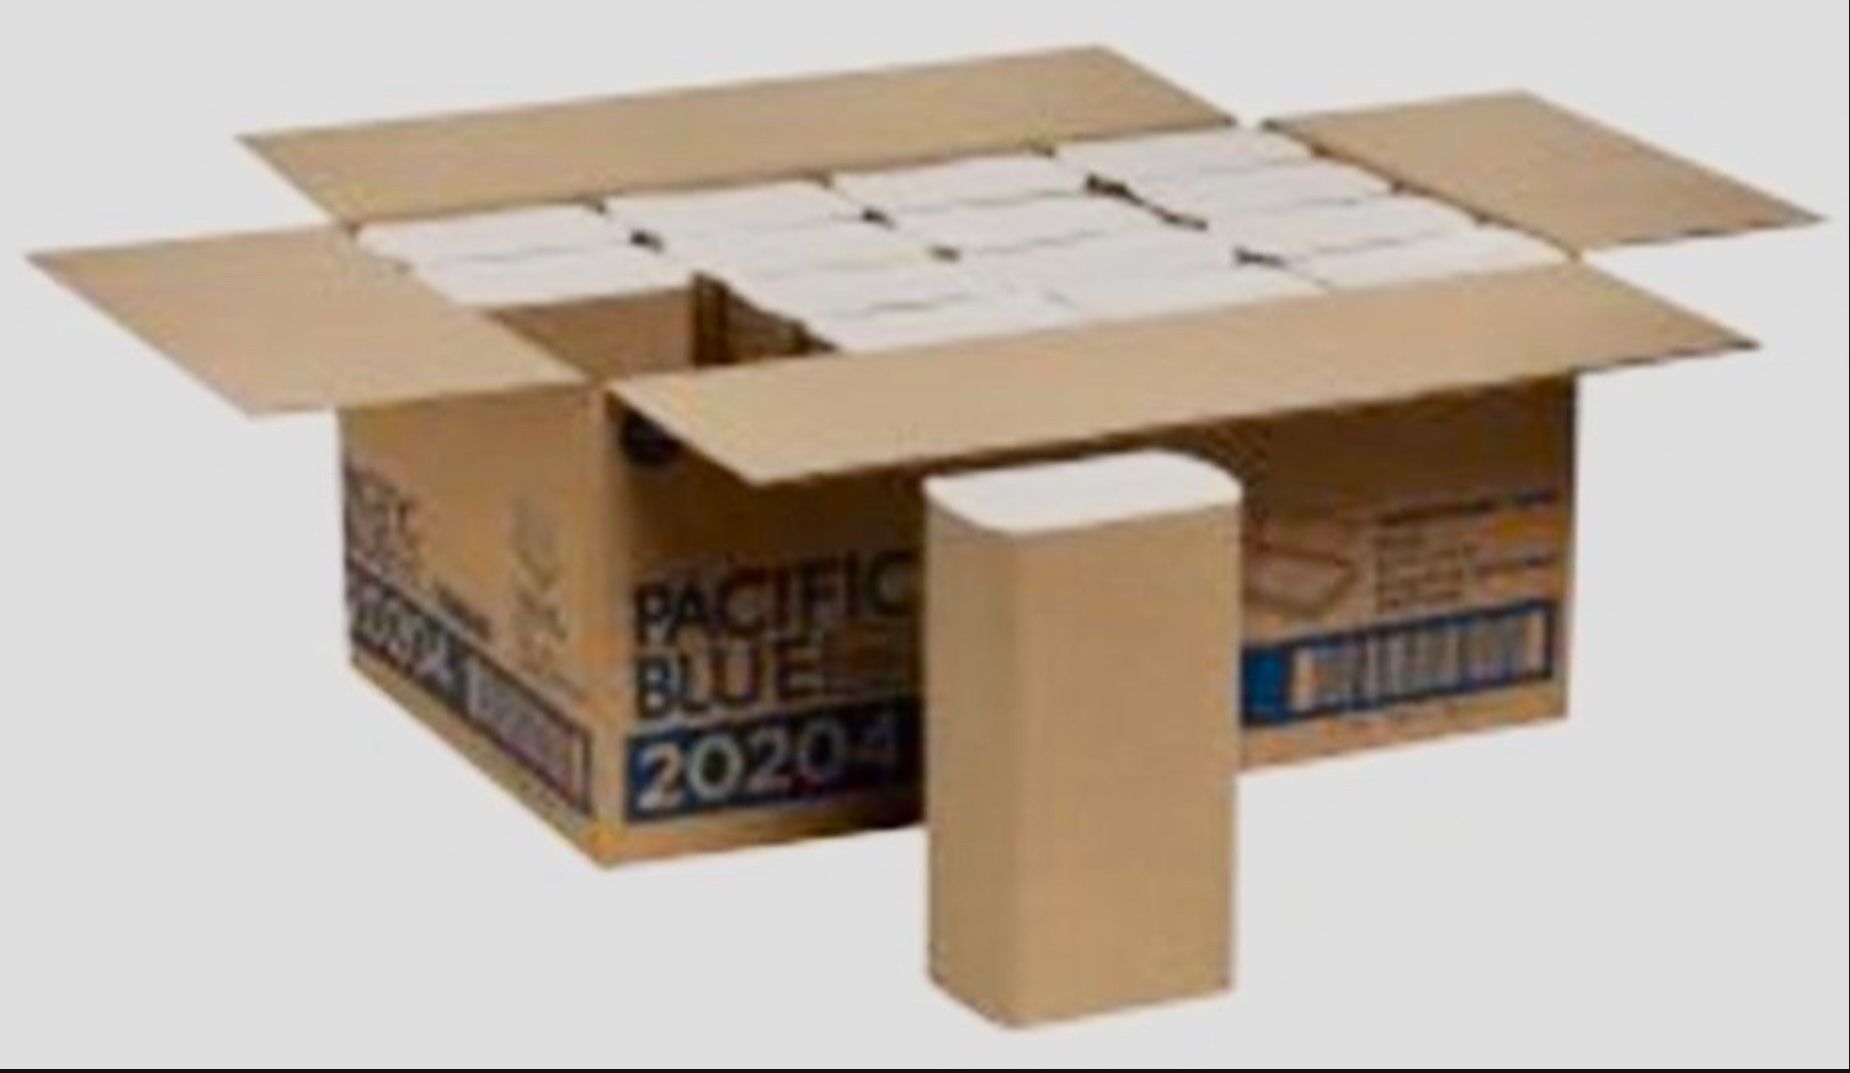 💥 New! 4,000 Multifold Paper Towels C-Fold Towels One Case Available PACIFIC BLUE Basic 120204🔥